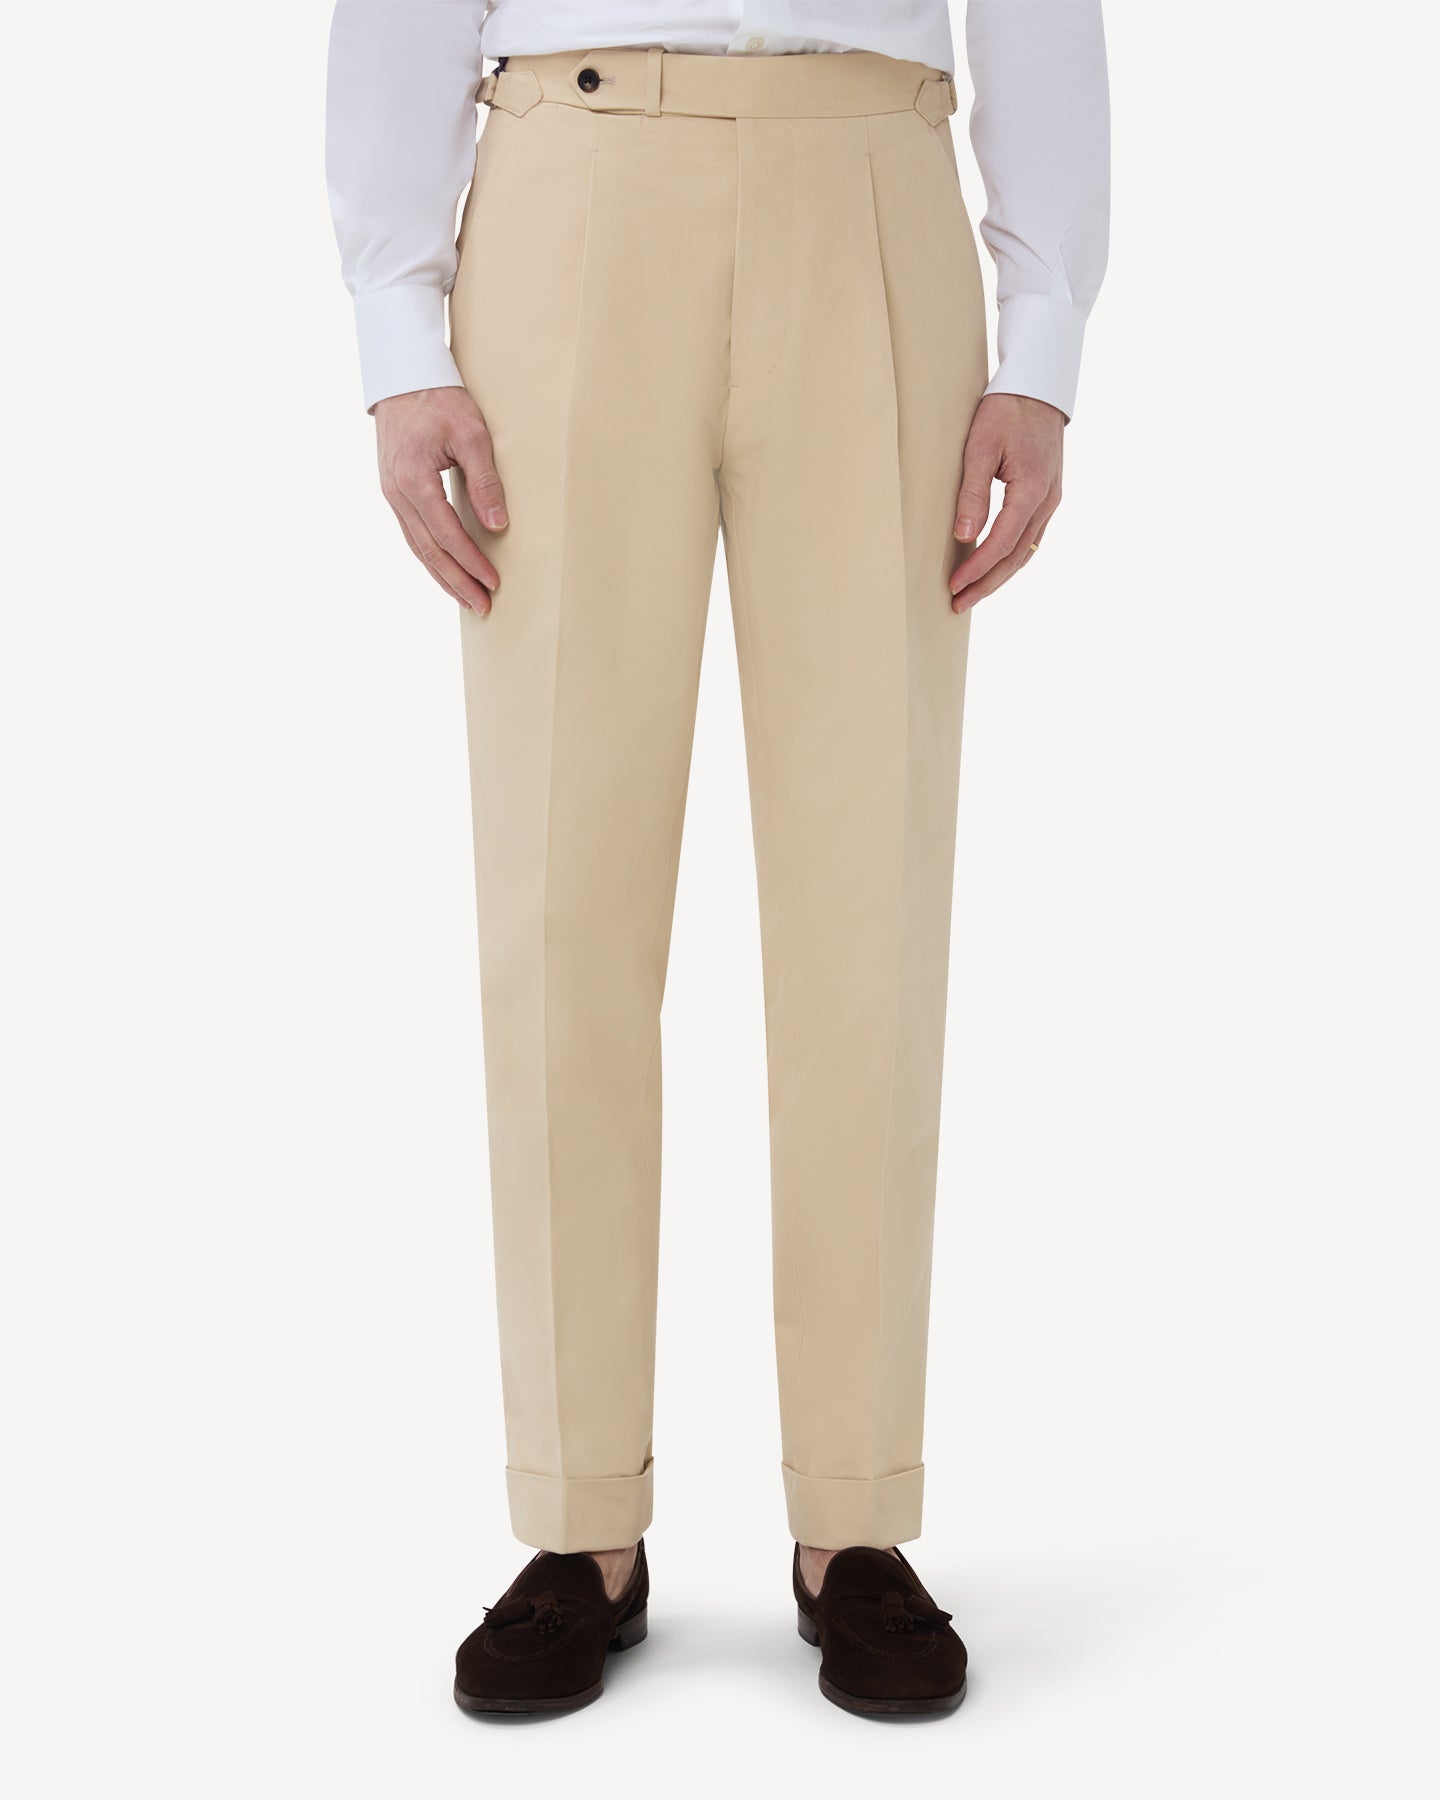 The front of cream cotton trousers with single pleats and side adjusters